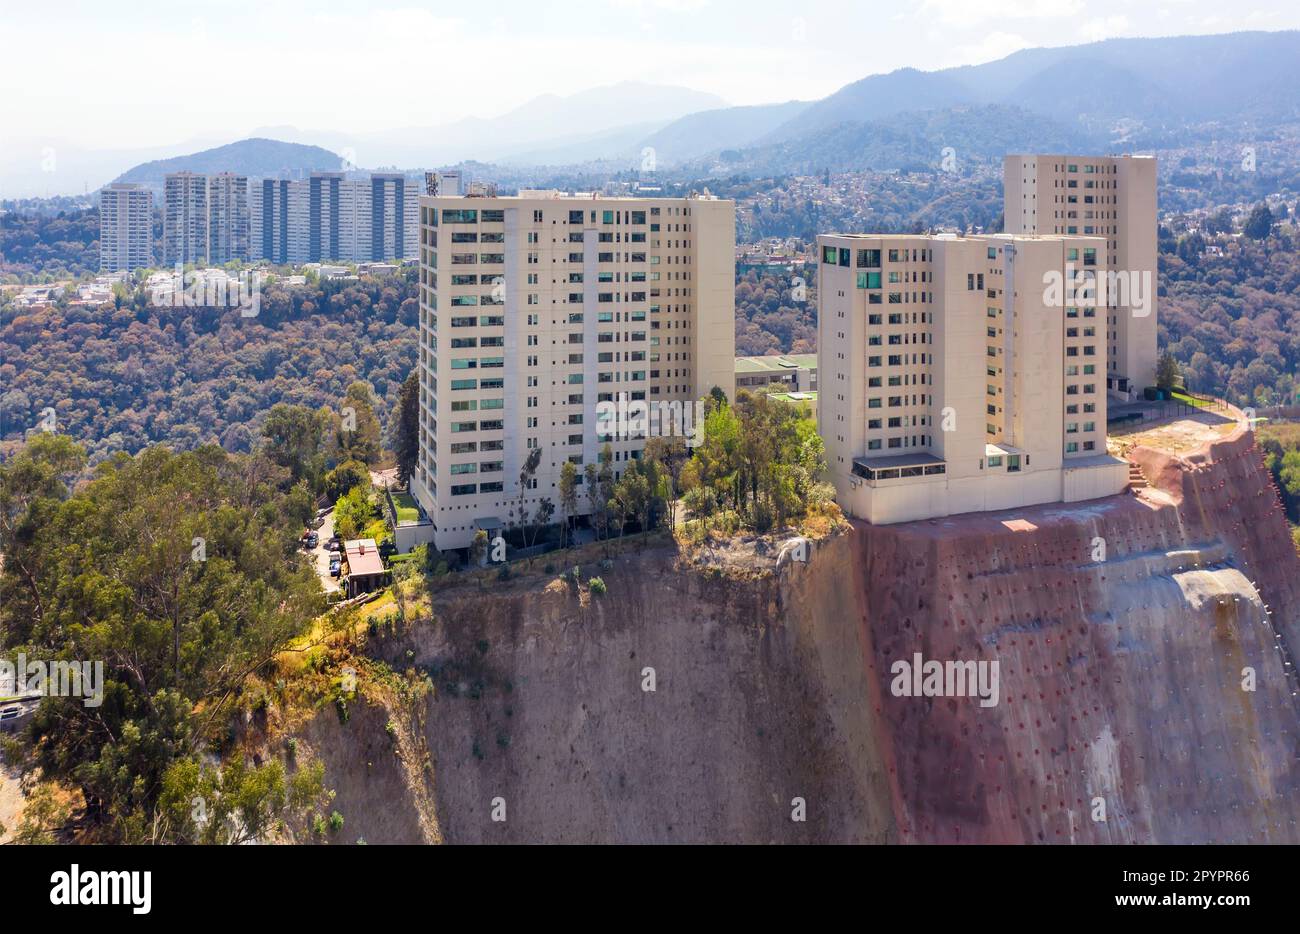 Precariously positioned high-rise buildings in the Santa Fe area of Mexico City, Mexico Stock Photo